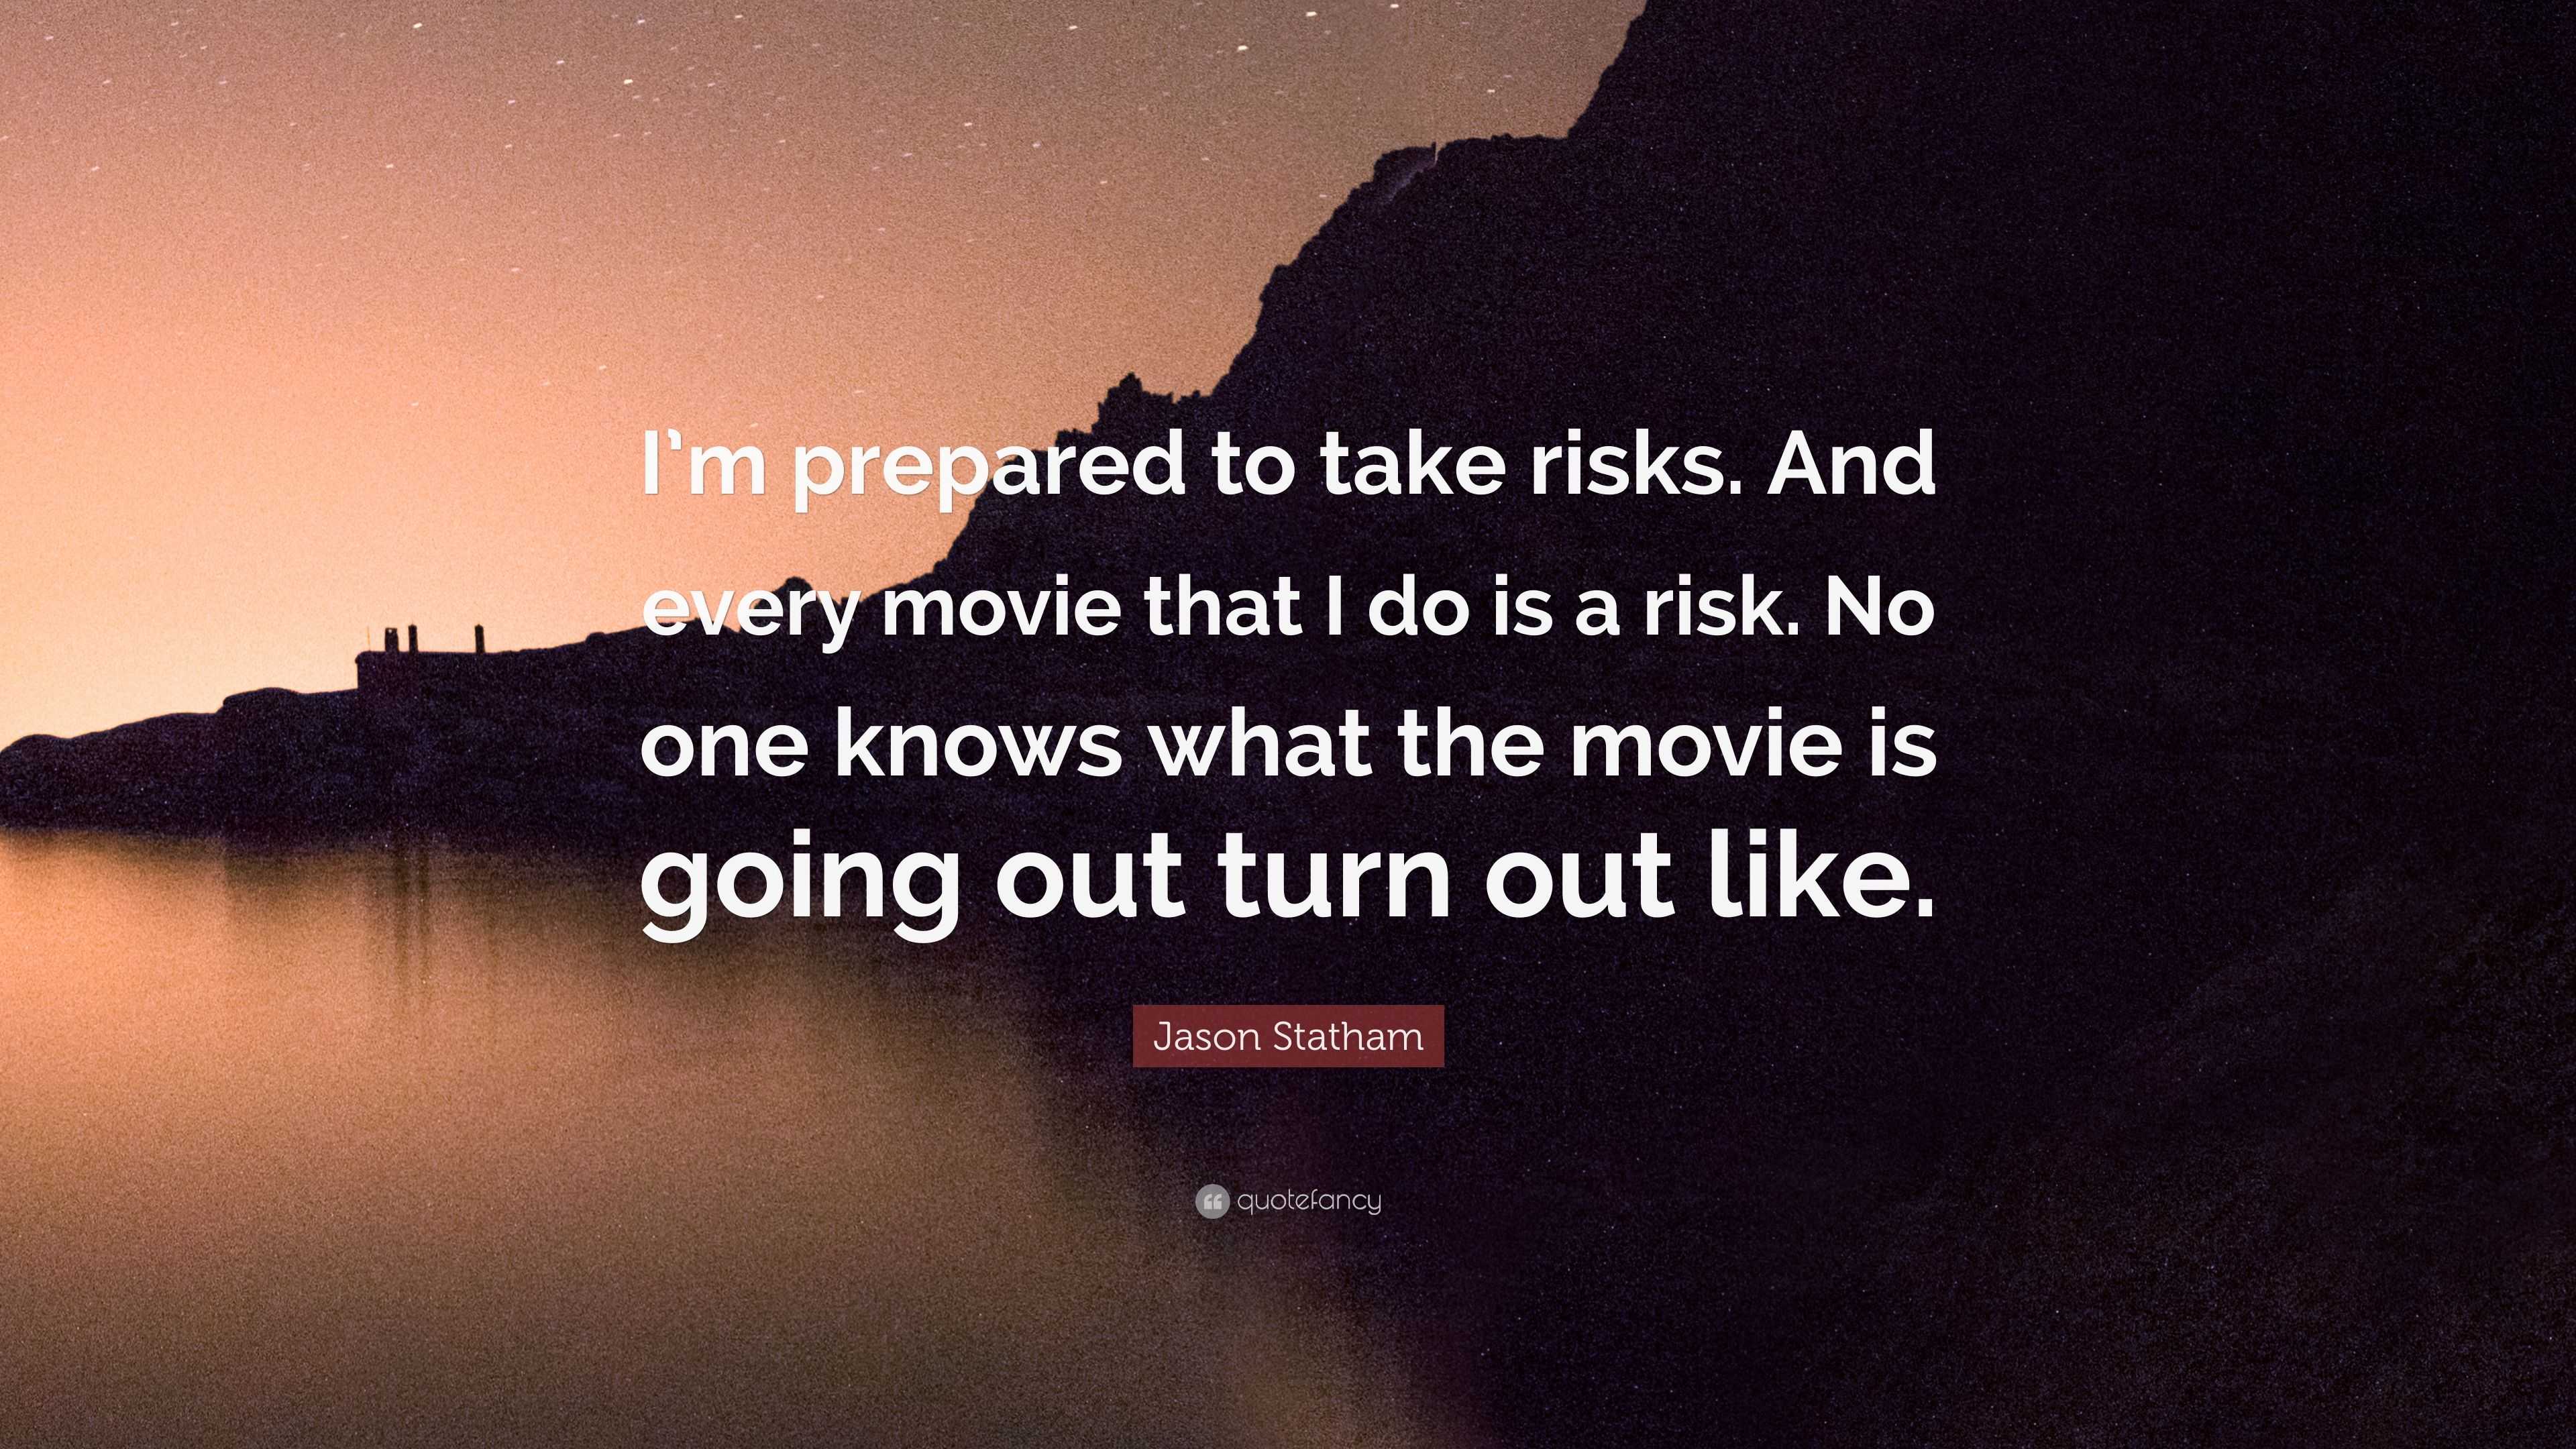 Jason Statham Quote: "I'm prepared to take risks. And every movie that I do is a risk. No one ...